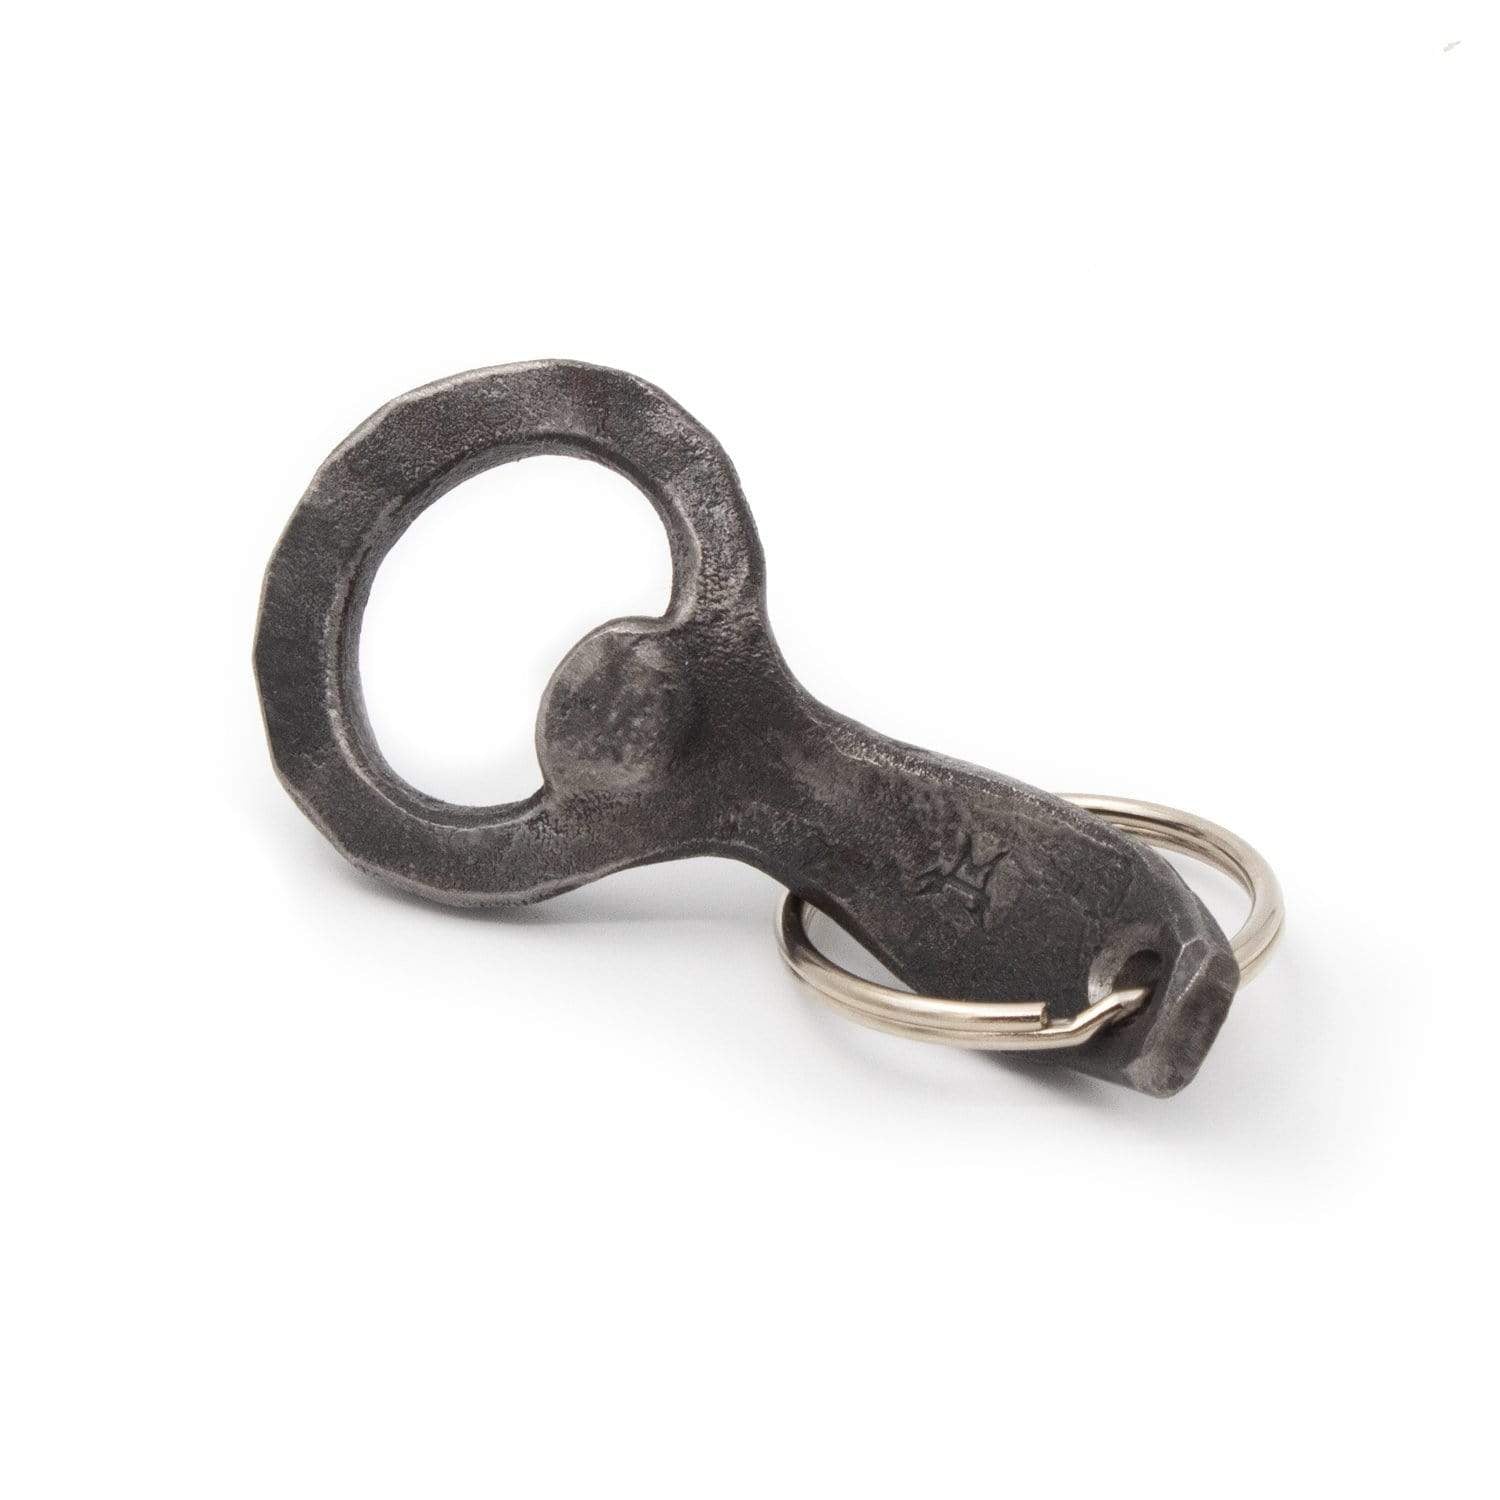 https://mainstreetforge.com/cdn/shop/products/main-street-forge-keychain-bottle-opener-hand-stamped-unique-heavy-duty-tool-hand-forged-by-blacksmith-in-the-usa-main-street-forge-14253506494604_2000x.jpg?v=1580824731